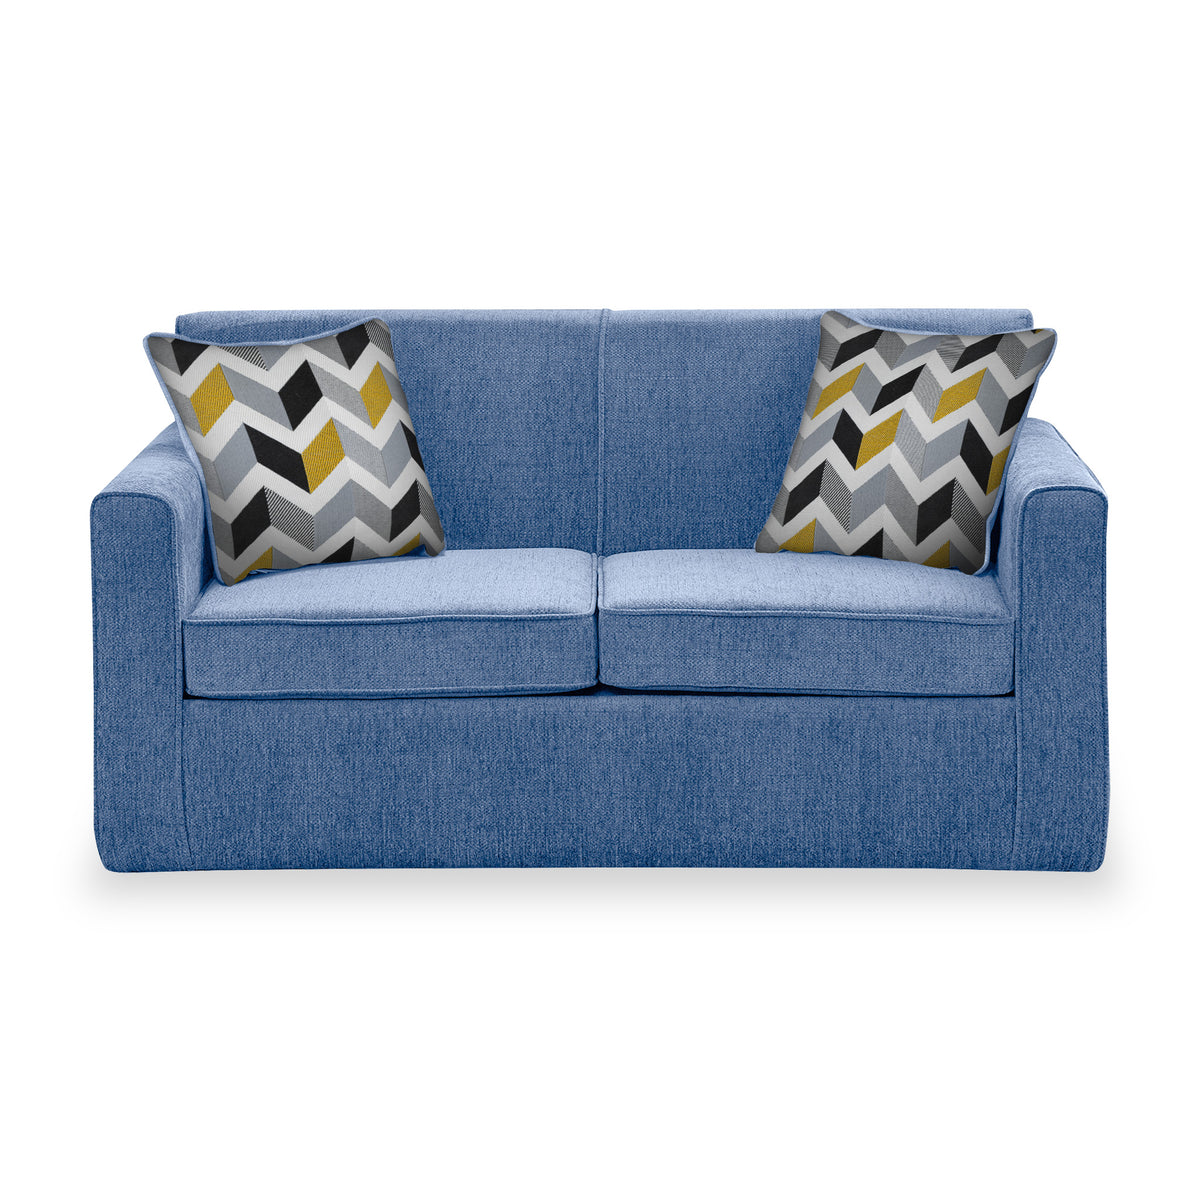 Bawtry Denim Faux Linen 2 Seater Sofabed with Mustard Scatter Cushions from Roseland Furniture